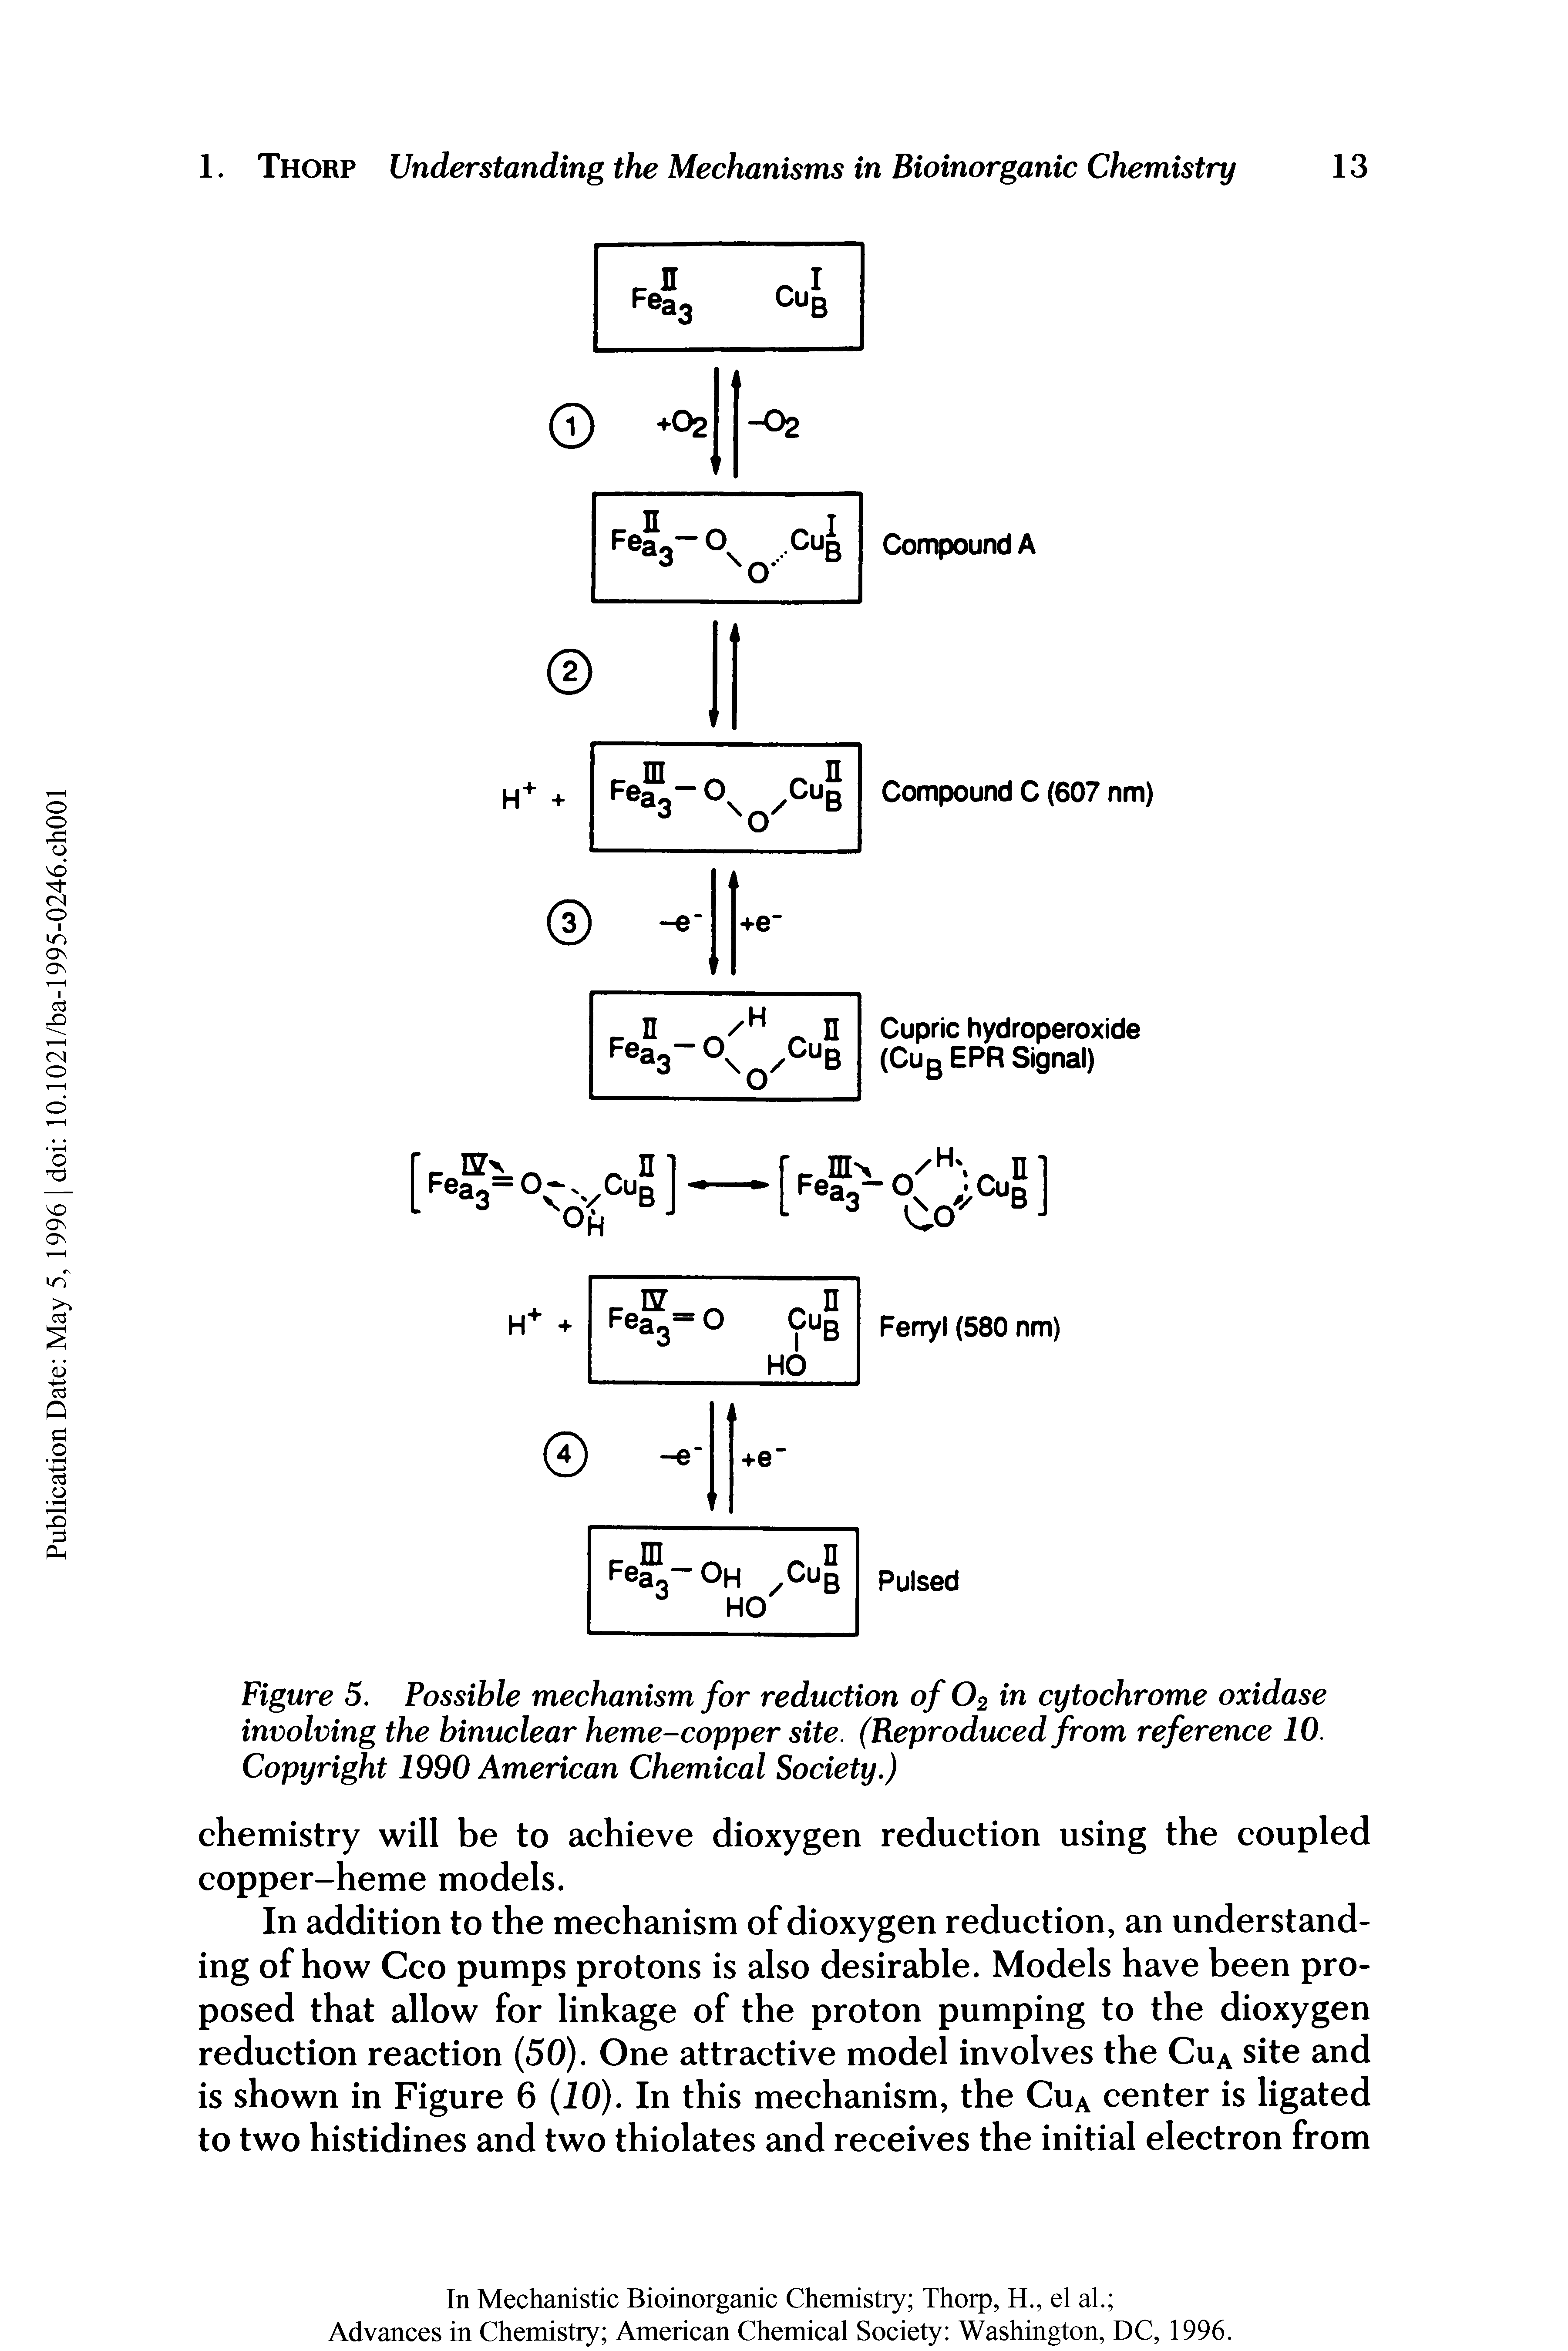 Figure 5. Possible mechanism for reduction of 02 in cytochrome oxidase involving the binuclear heme-copper site. (Reproduced from reference 10. Copyright 1990 American Chemical Society.)...